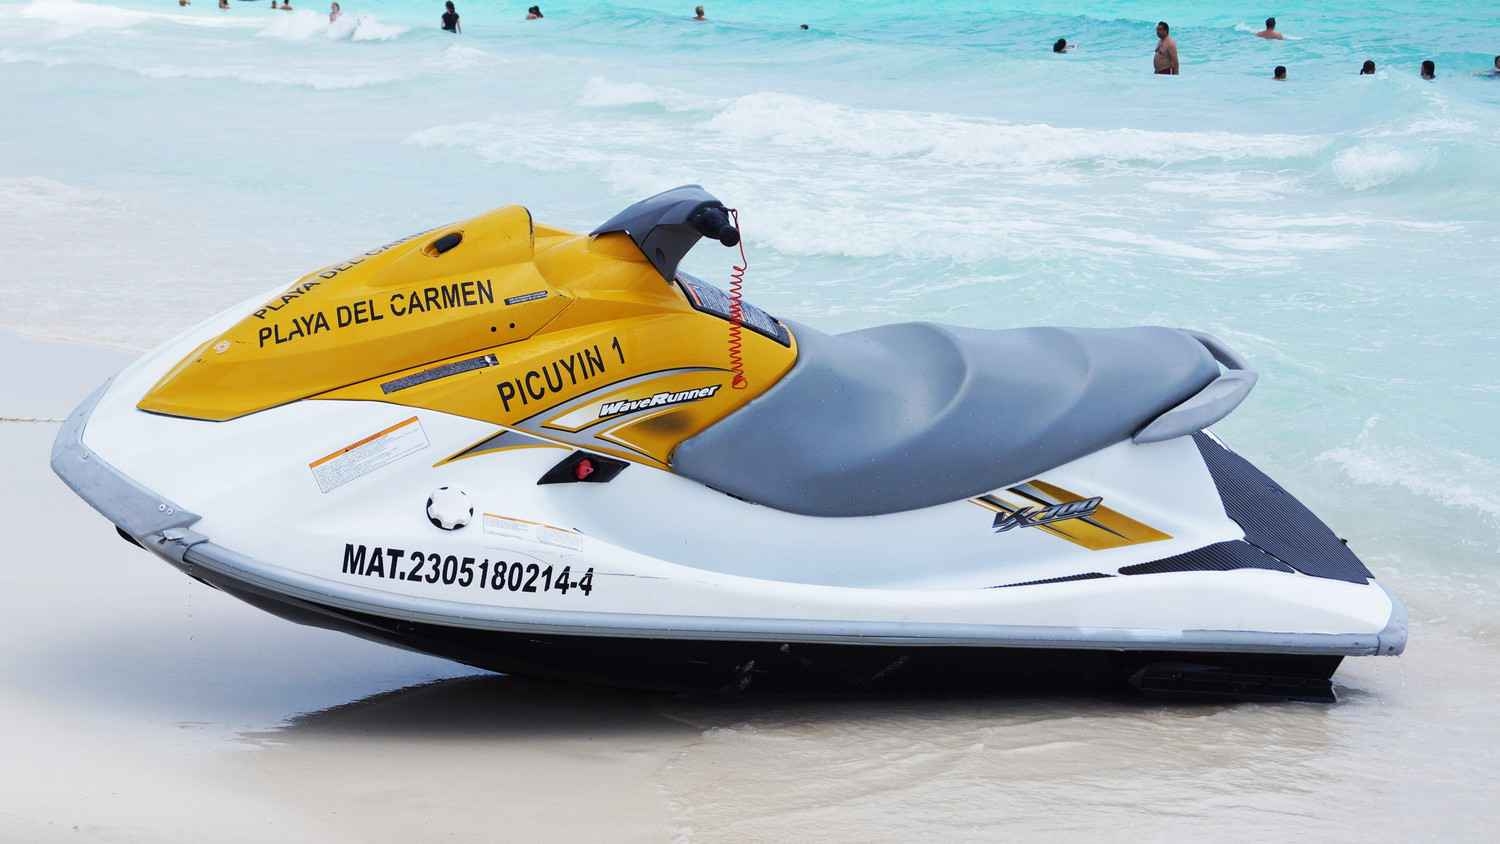 A jet ski for rent on the beach.